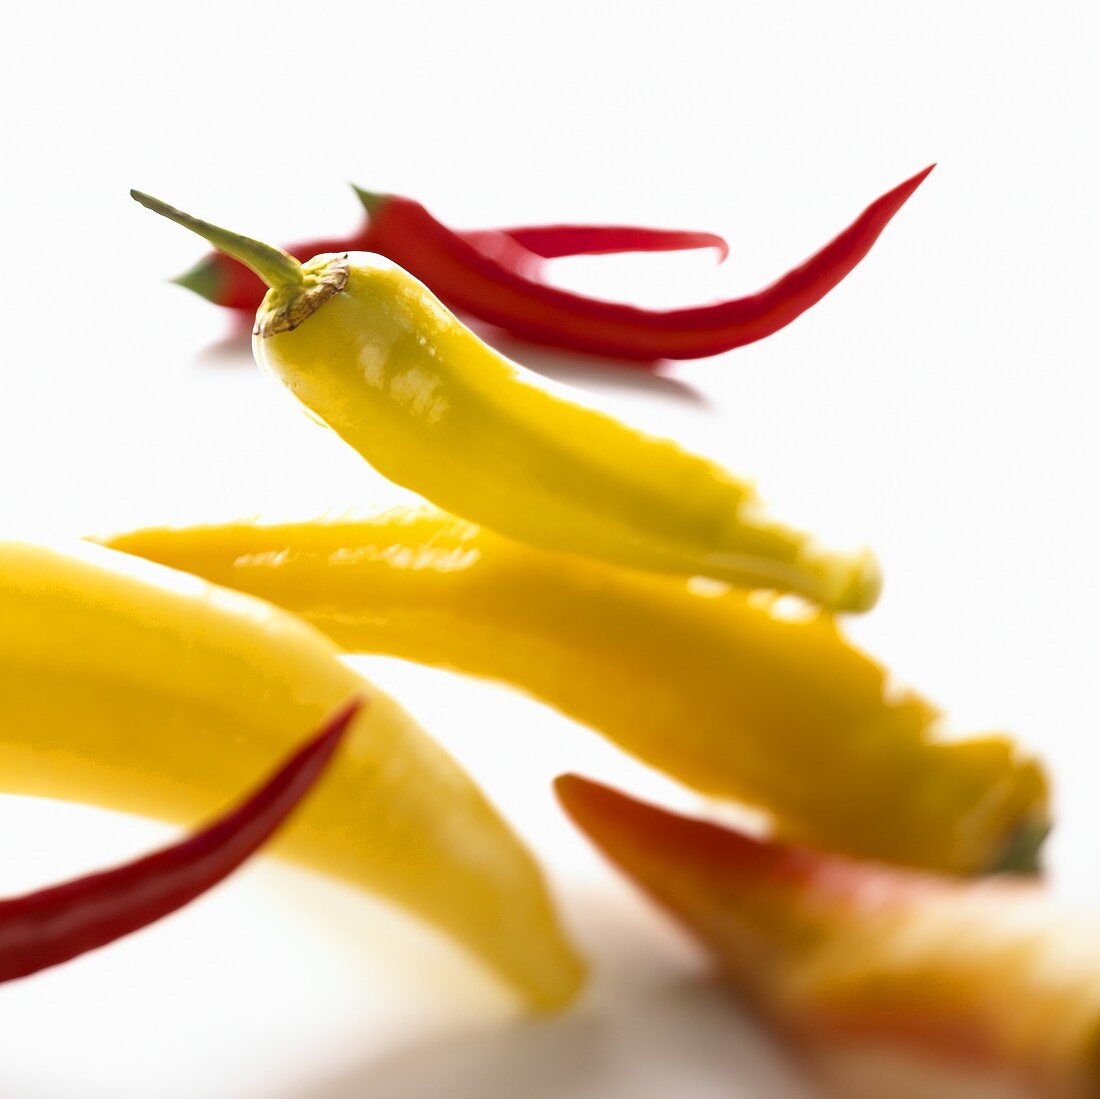 Several different chili peppers